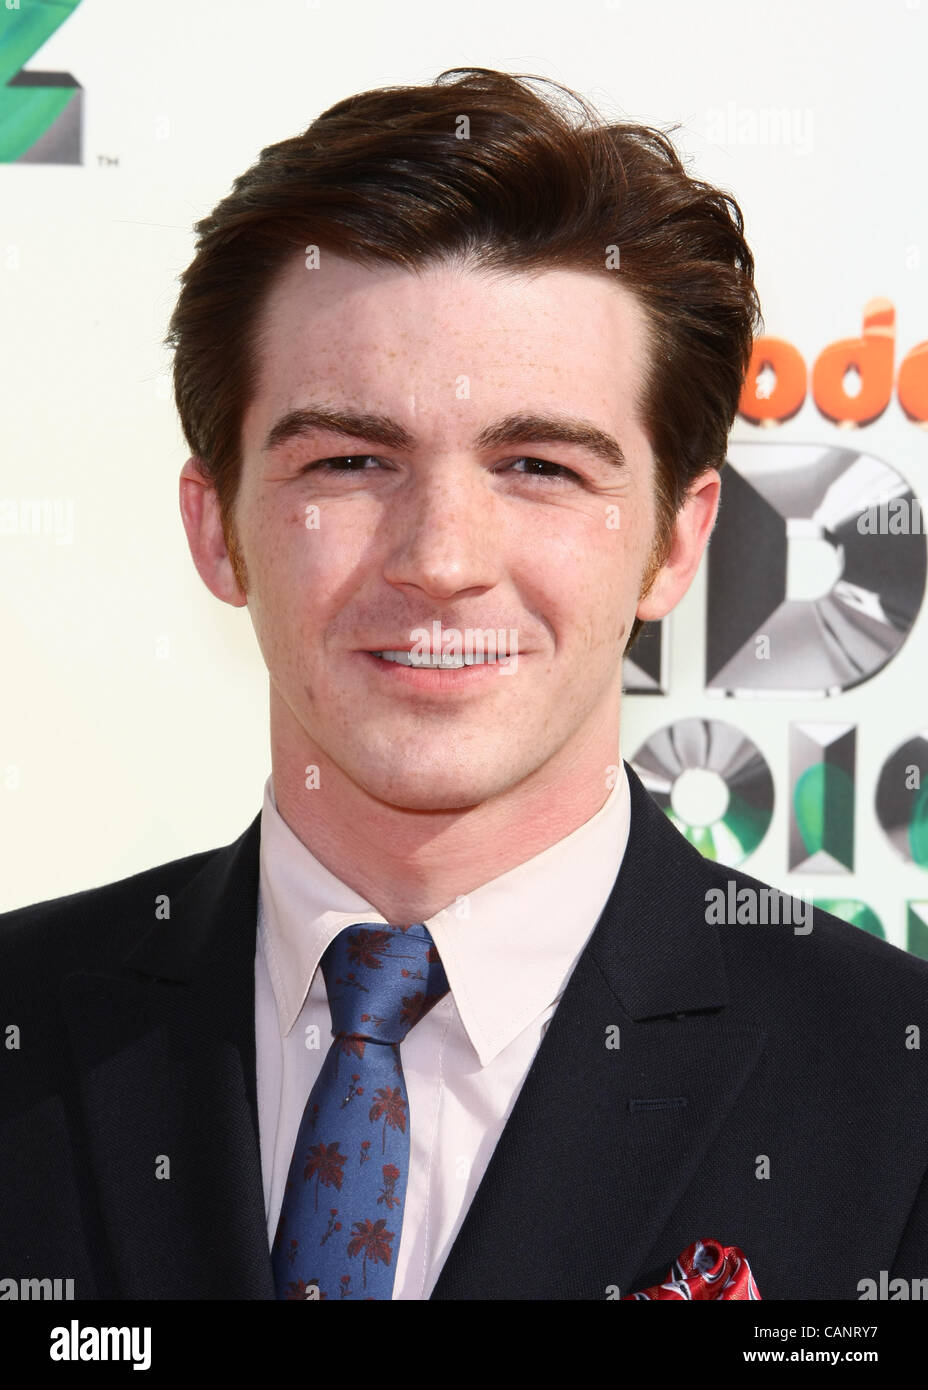 DRAKE BELL 25TH NICKELODEON KID'S CHOICE AWARDS DOWNTOWN LOS ANGELES CALIFORNIA USA 31 March 2012 Stock Photo